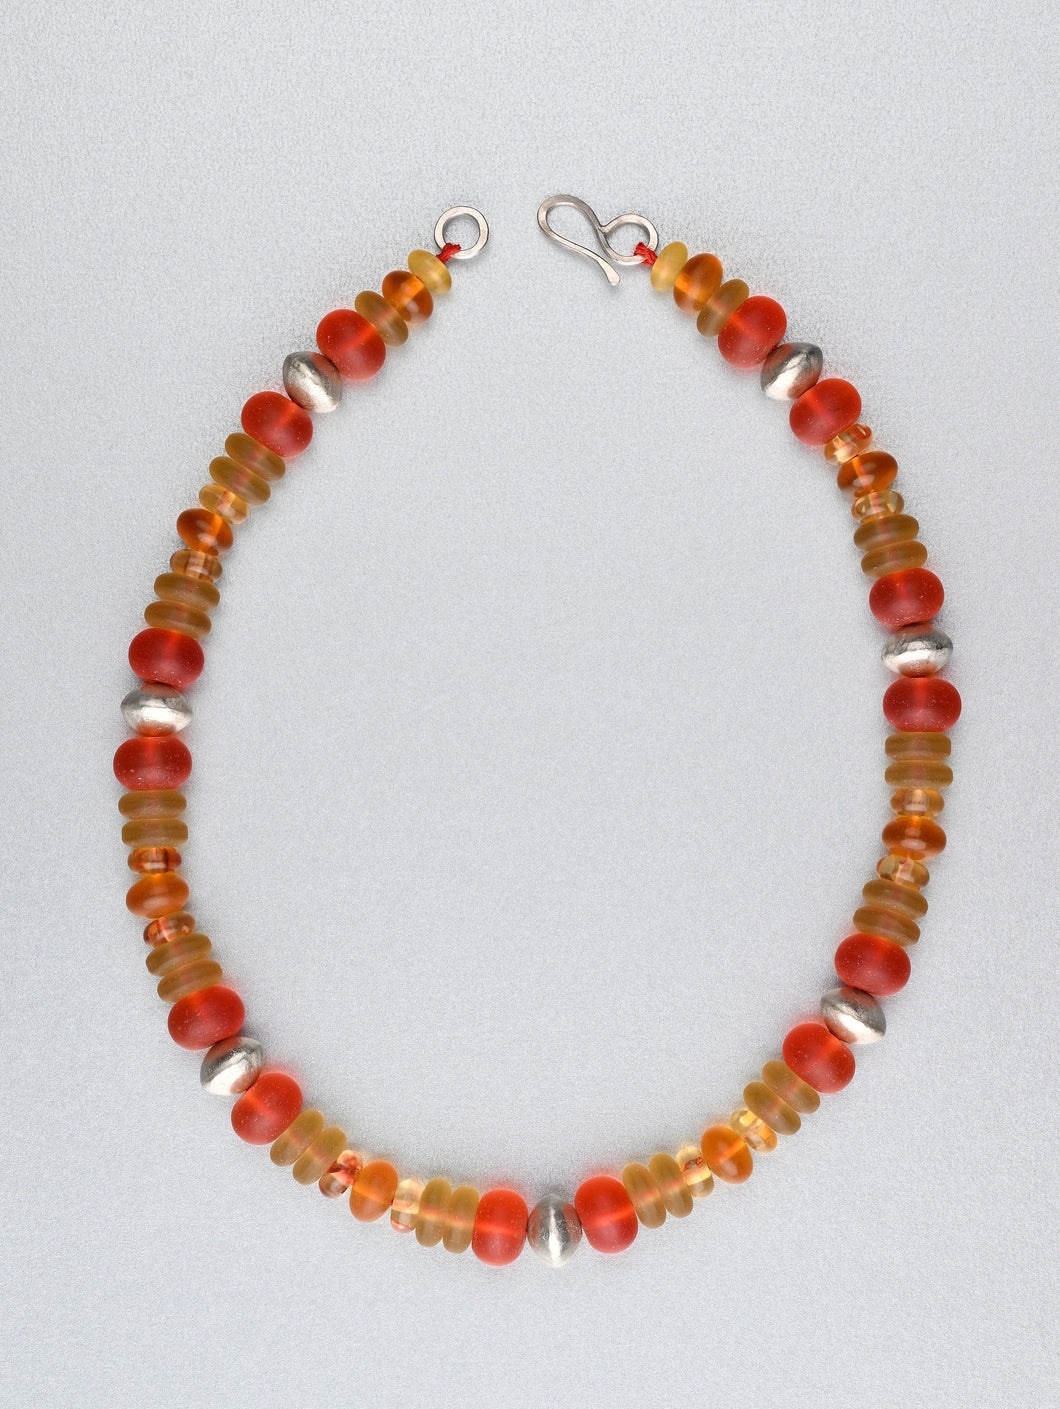 Beaded necklace with sea glass, amber and silver.